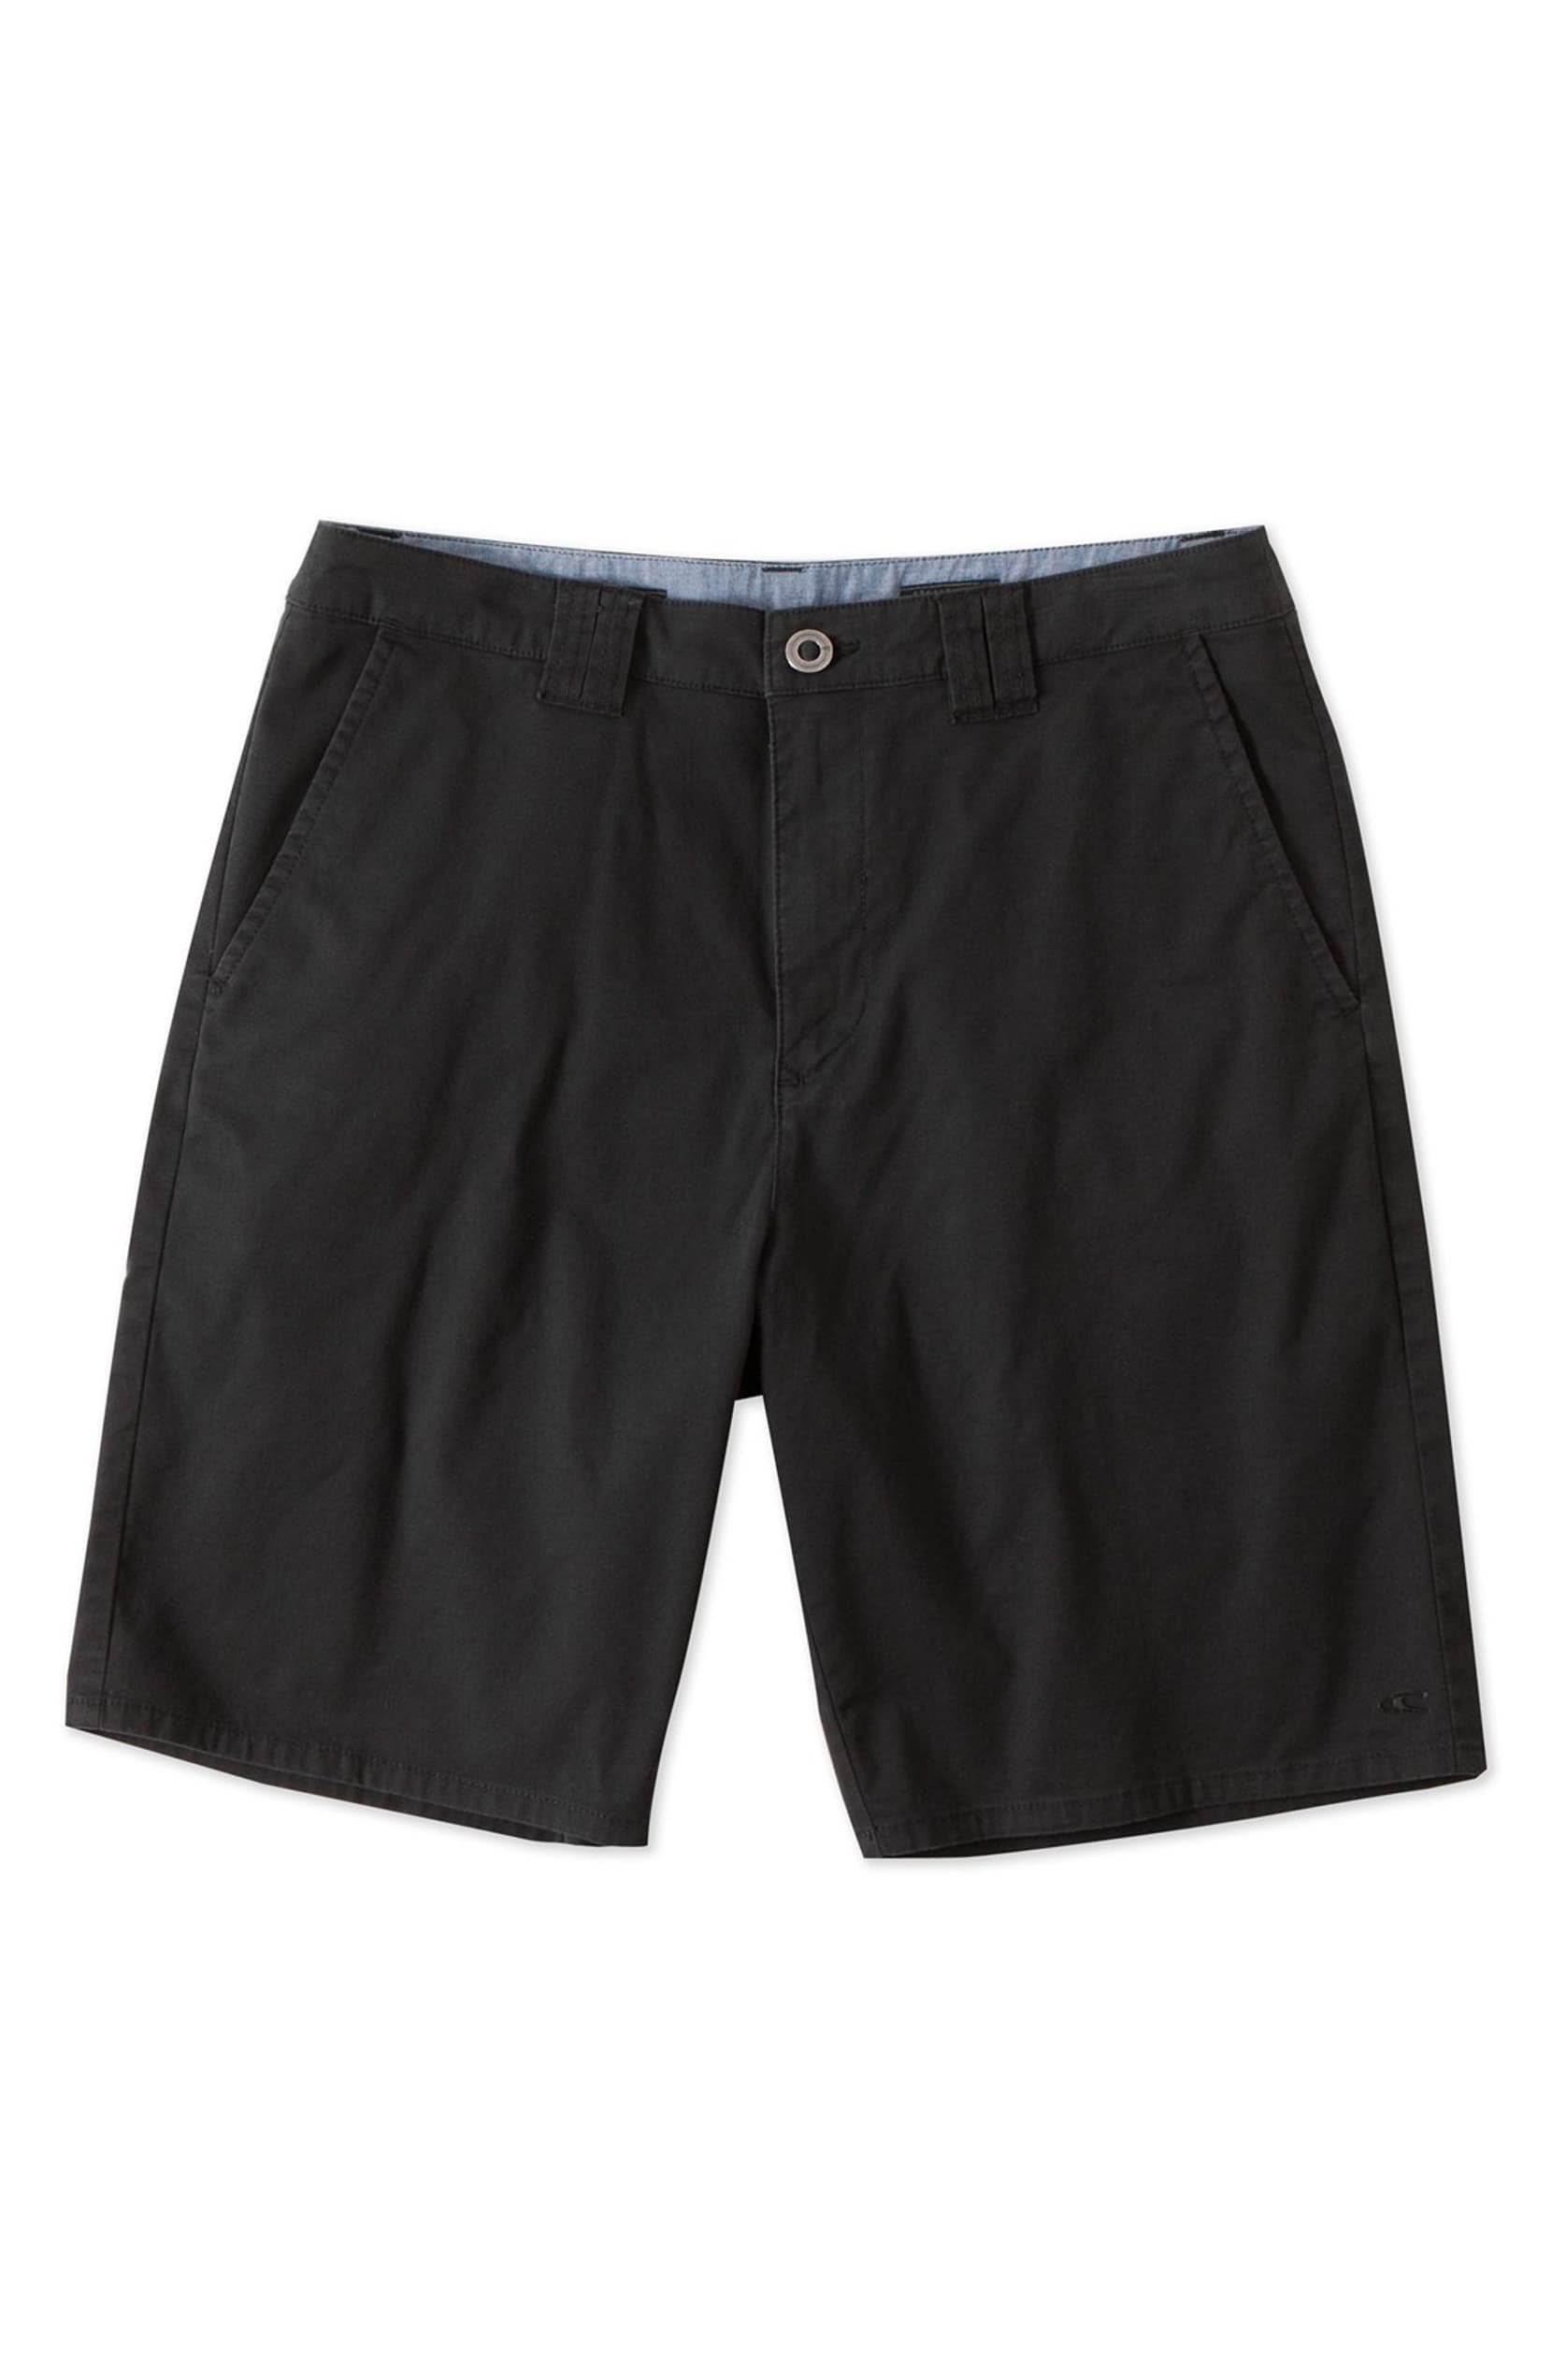 O'neill Contact Youth Short BLK 23